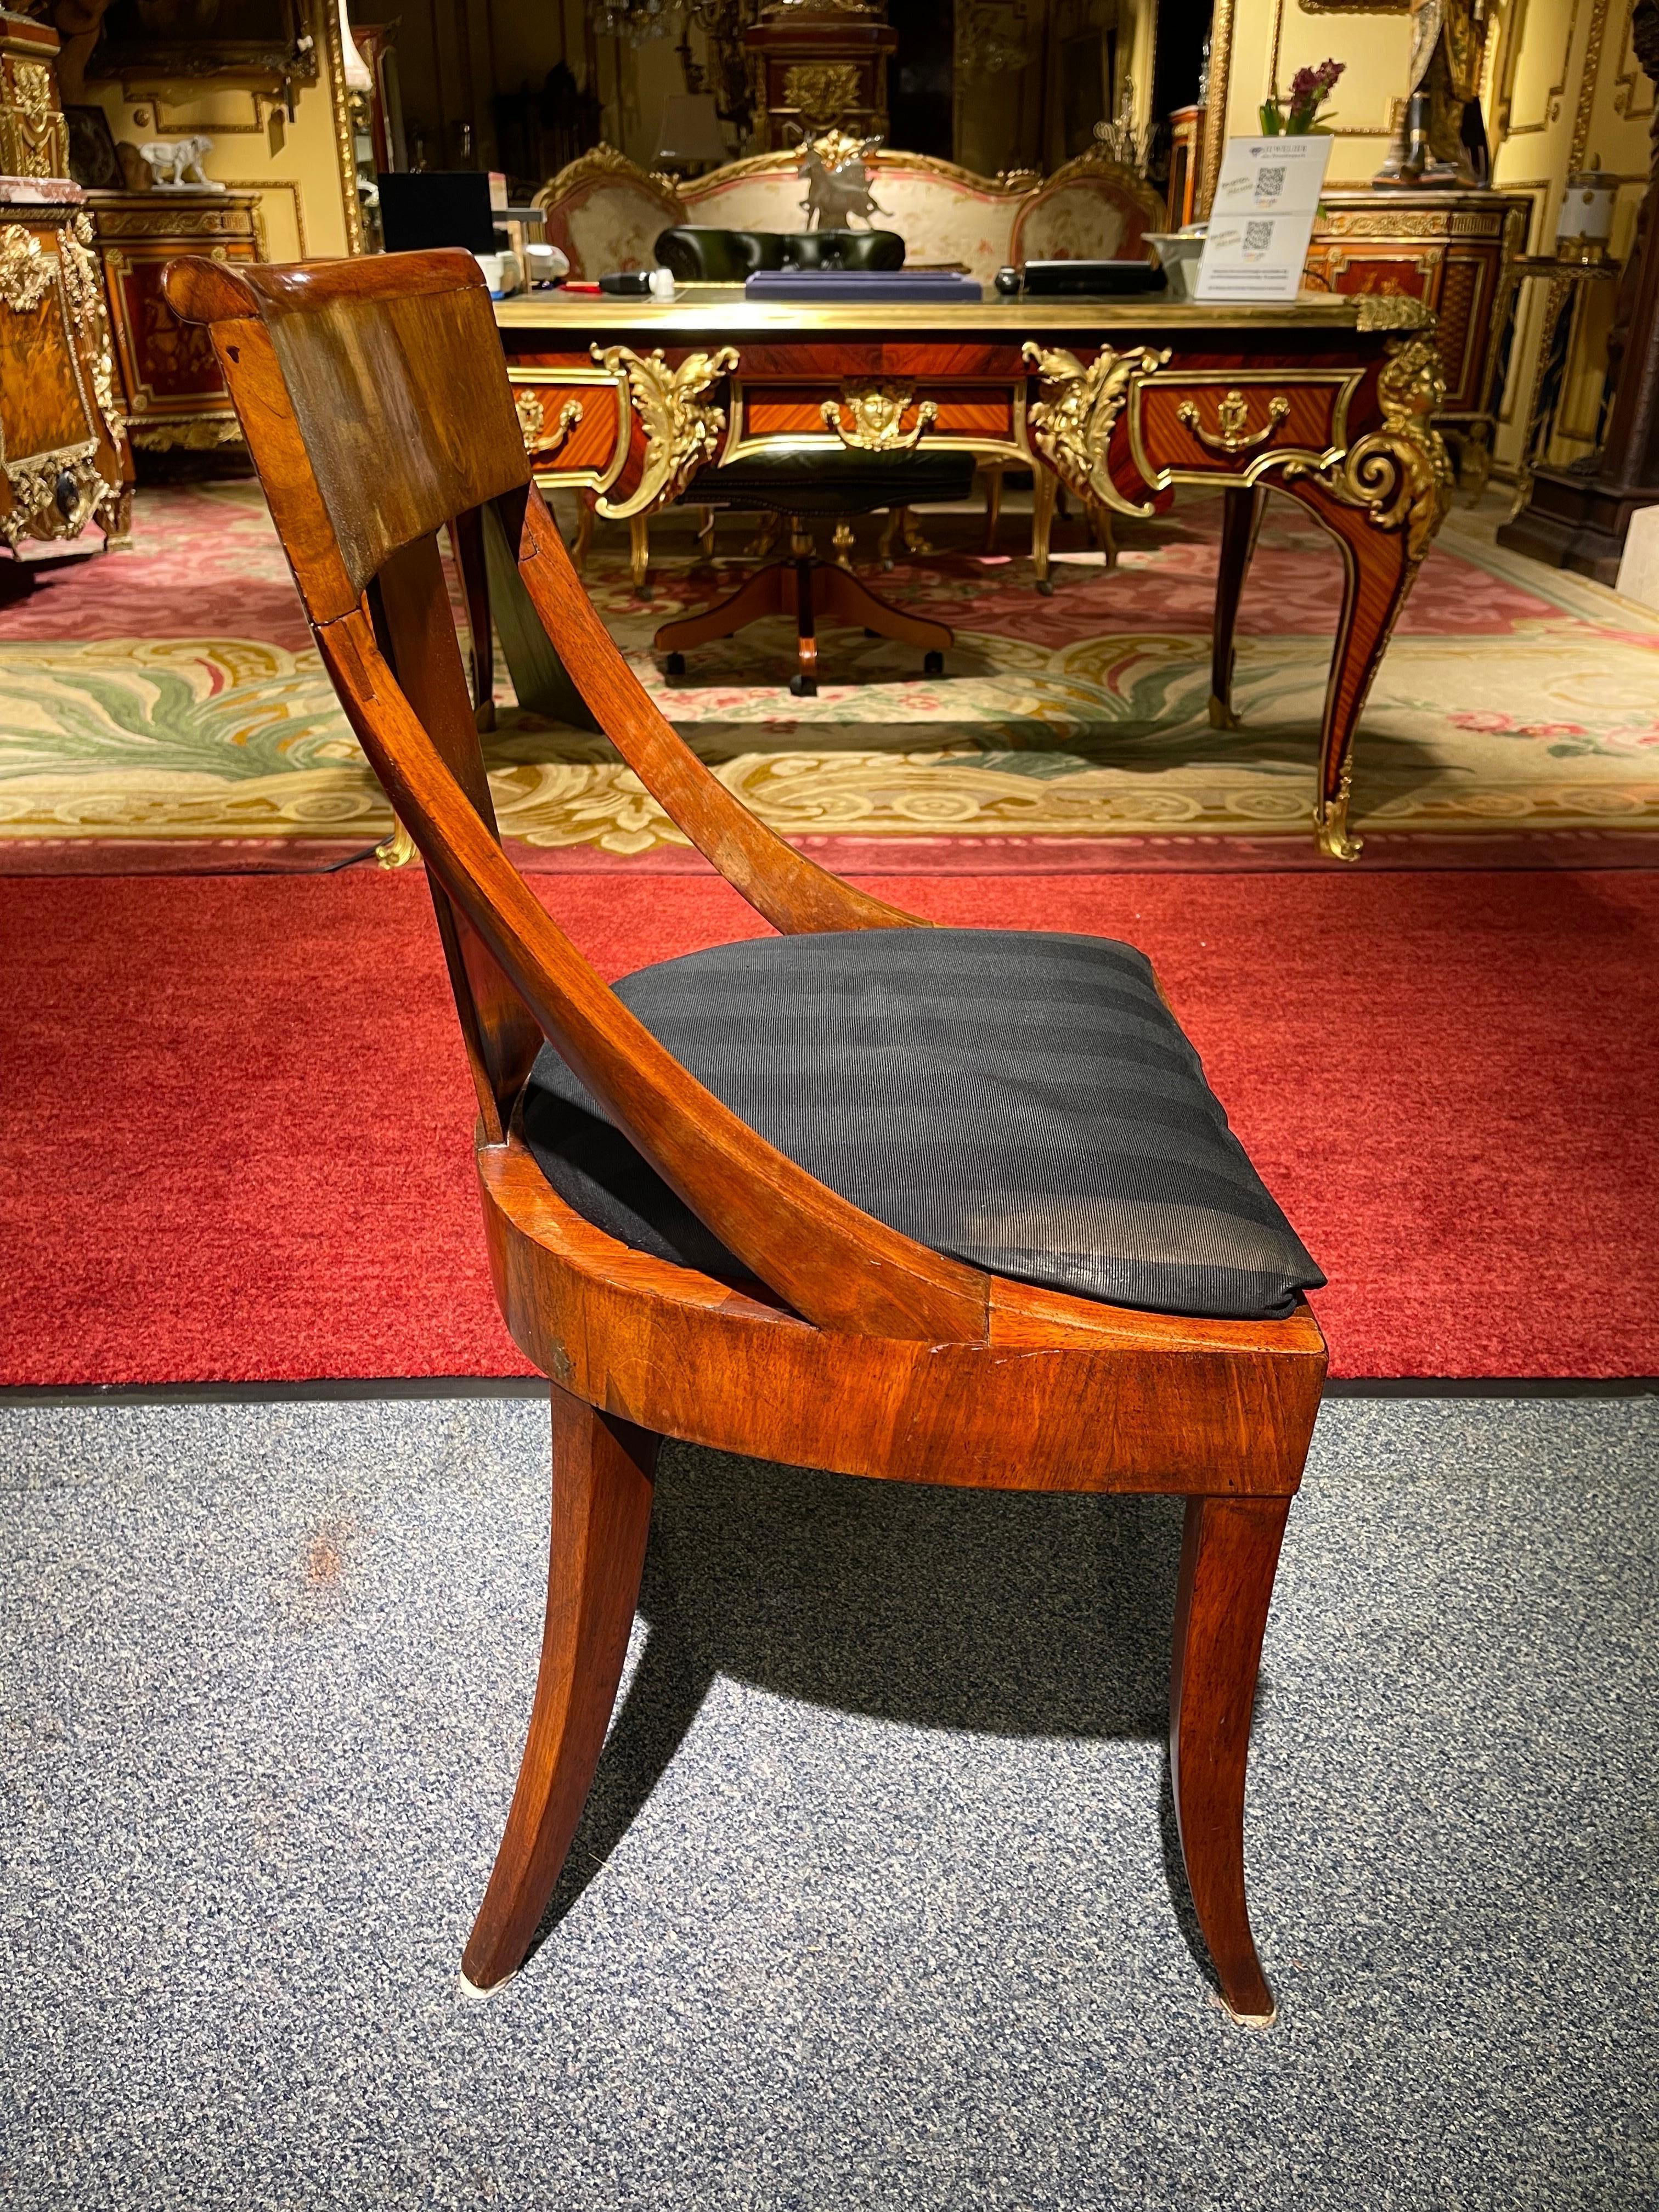 German Antique Empire Chairs from Around 1810-1815 For Sale